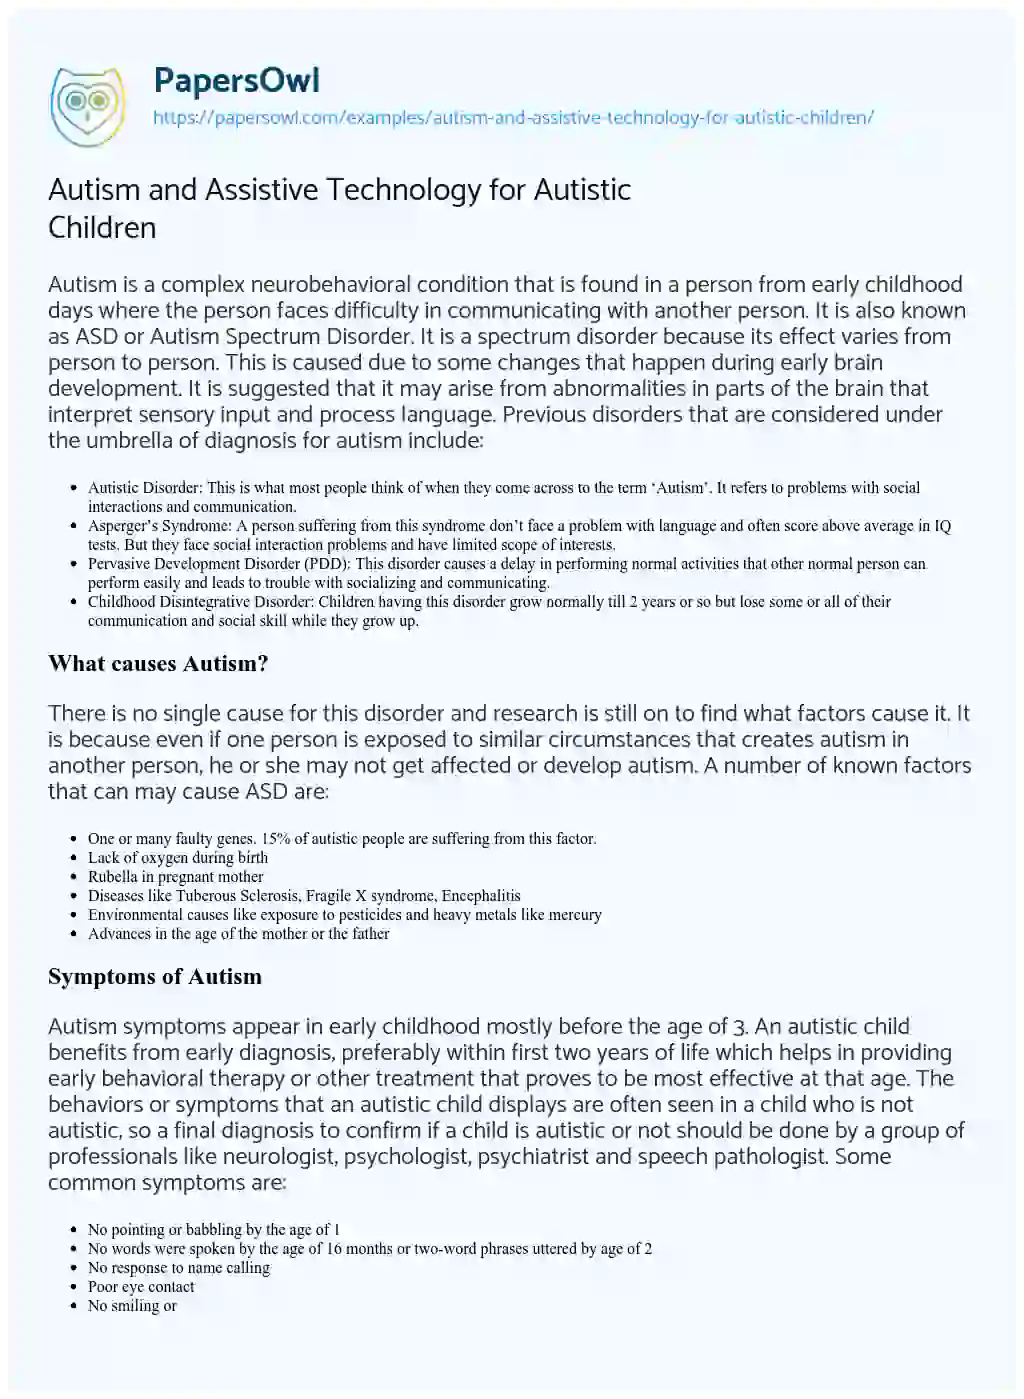 Essay on Autism and Assistive Technology for Autistic Children